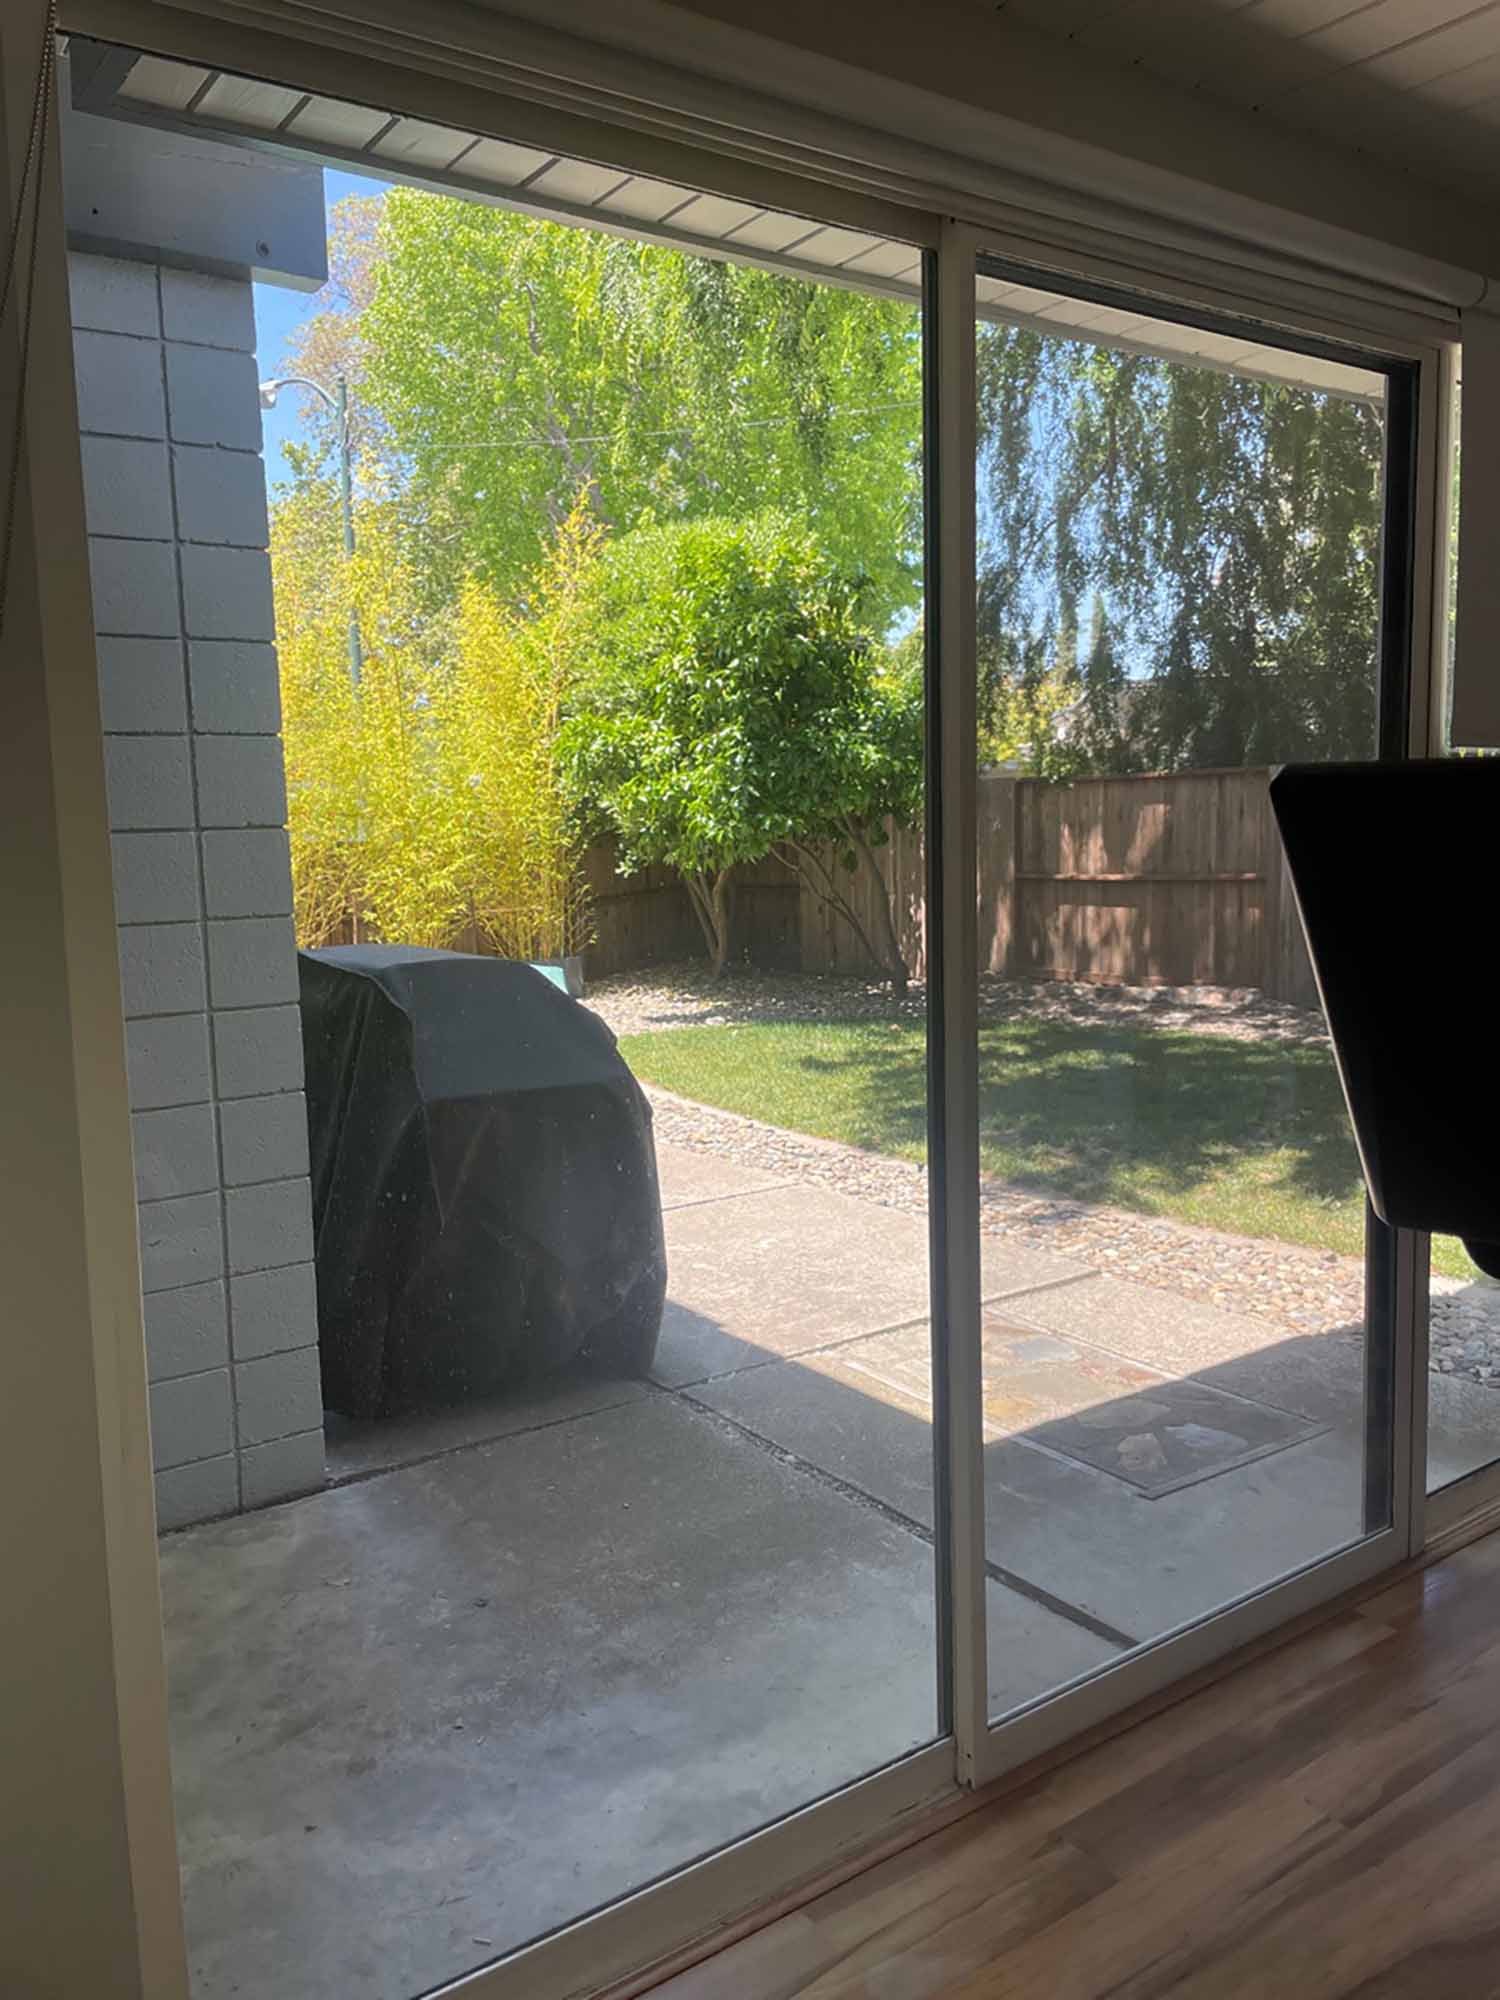 Safety Window Film for Walnut Creek, CA Home. Get a free estimate from ClimatePro.